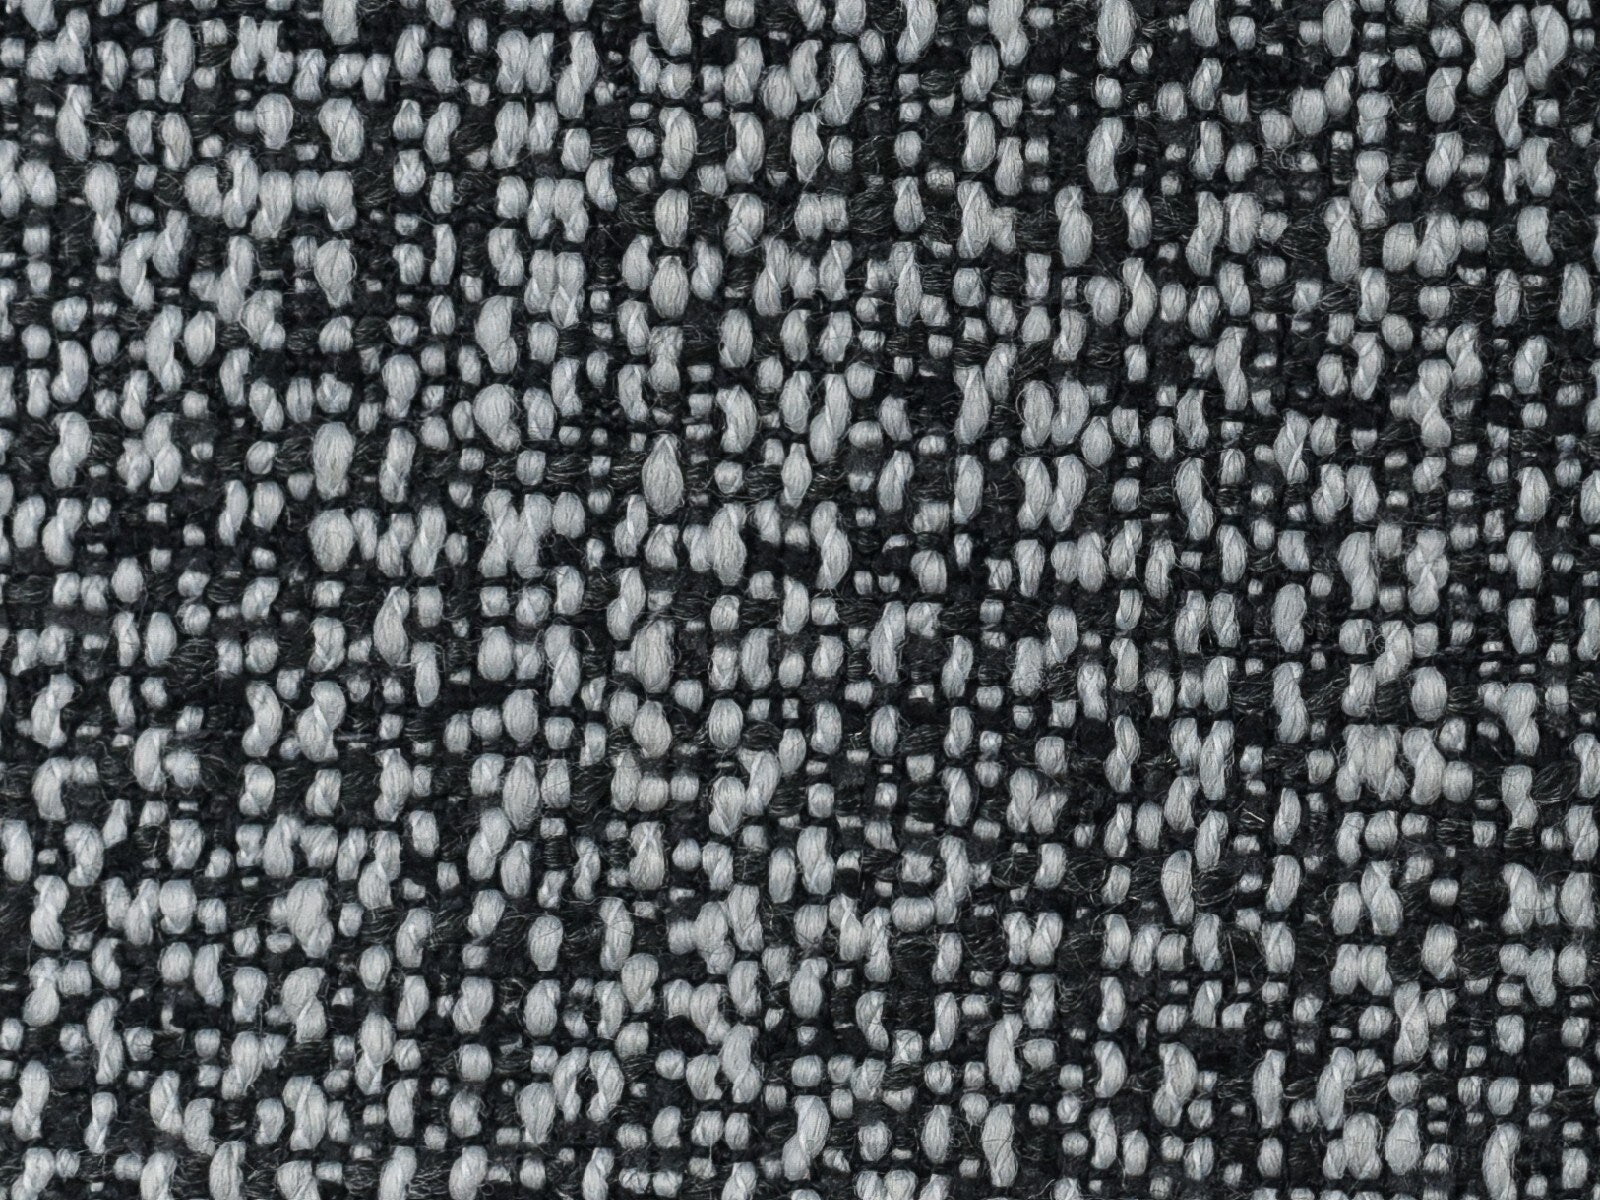 Contemporary Coarse Woven Textured Upholstery Fabric By The Yard 57"W/600GSM-Capability Caviar